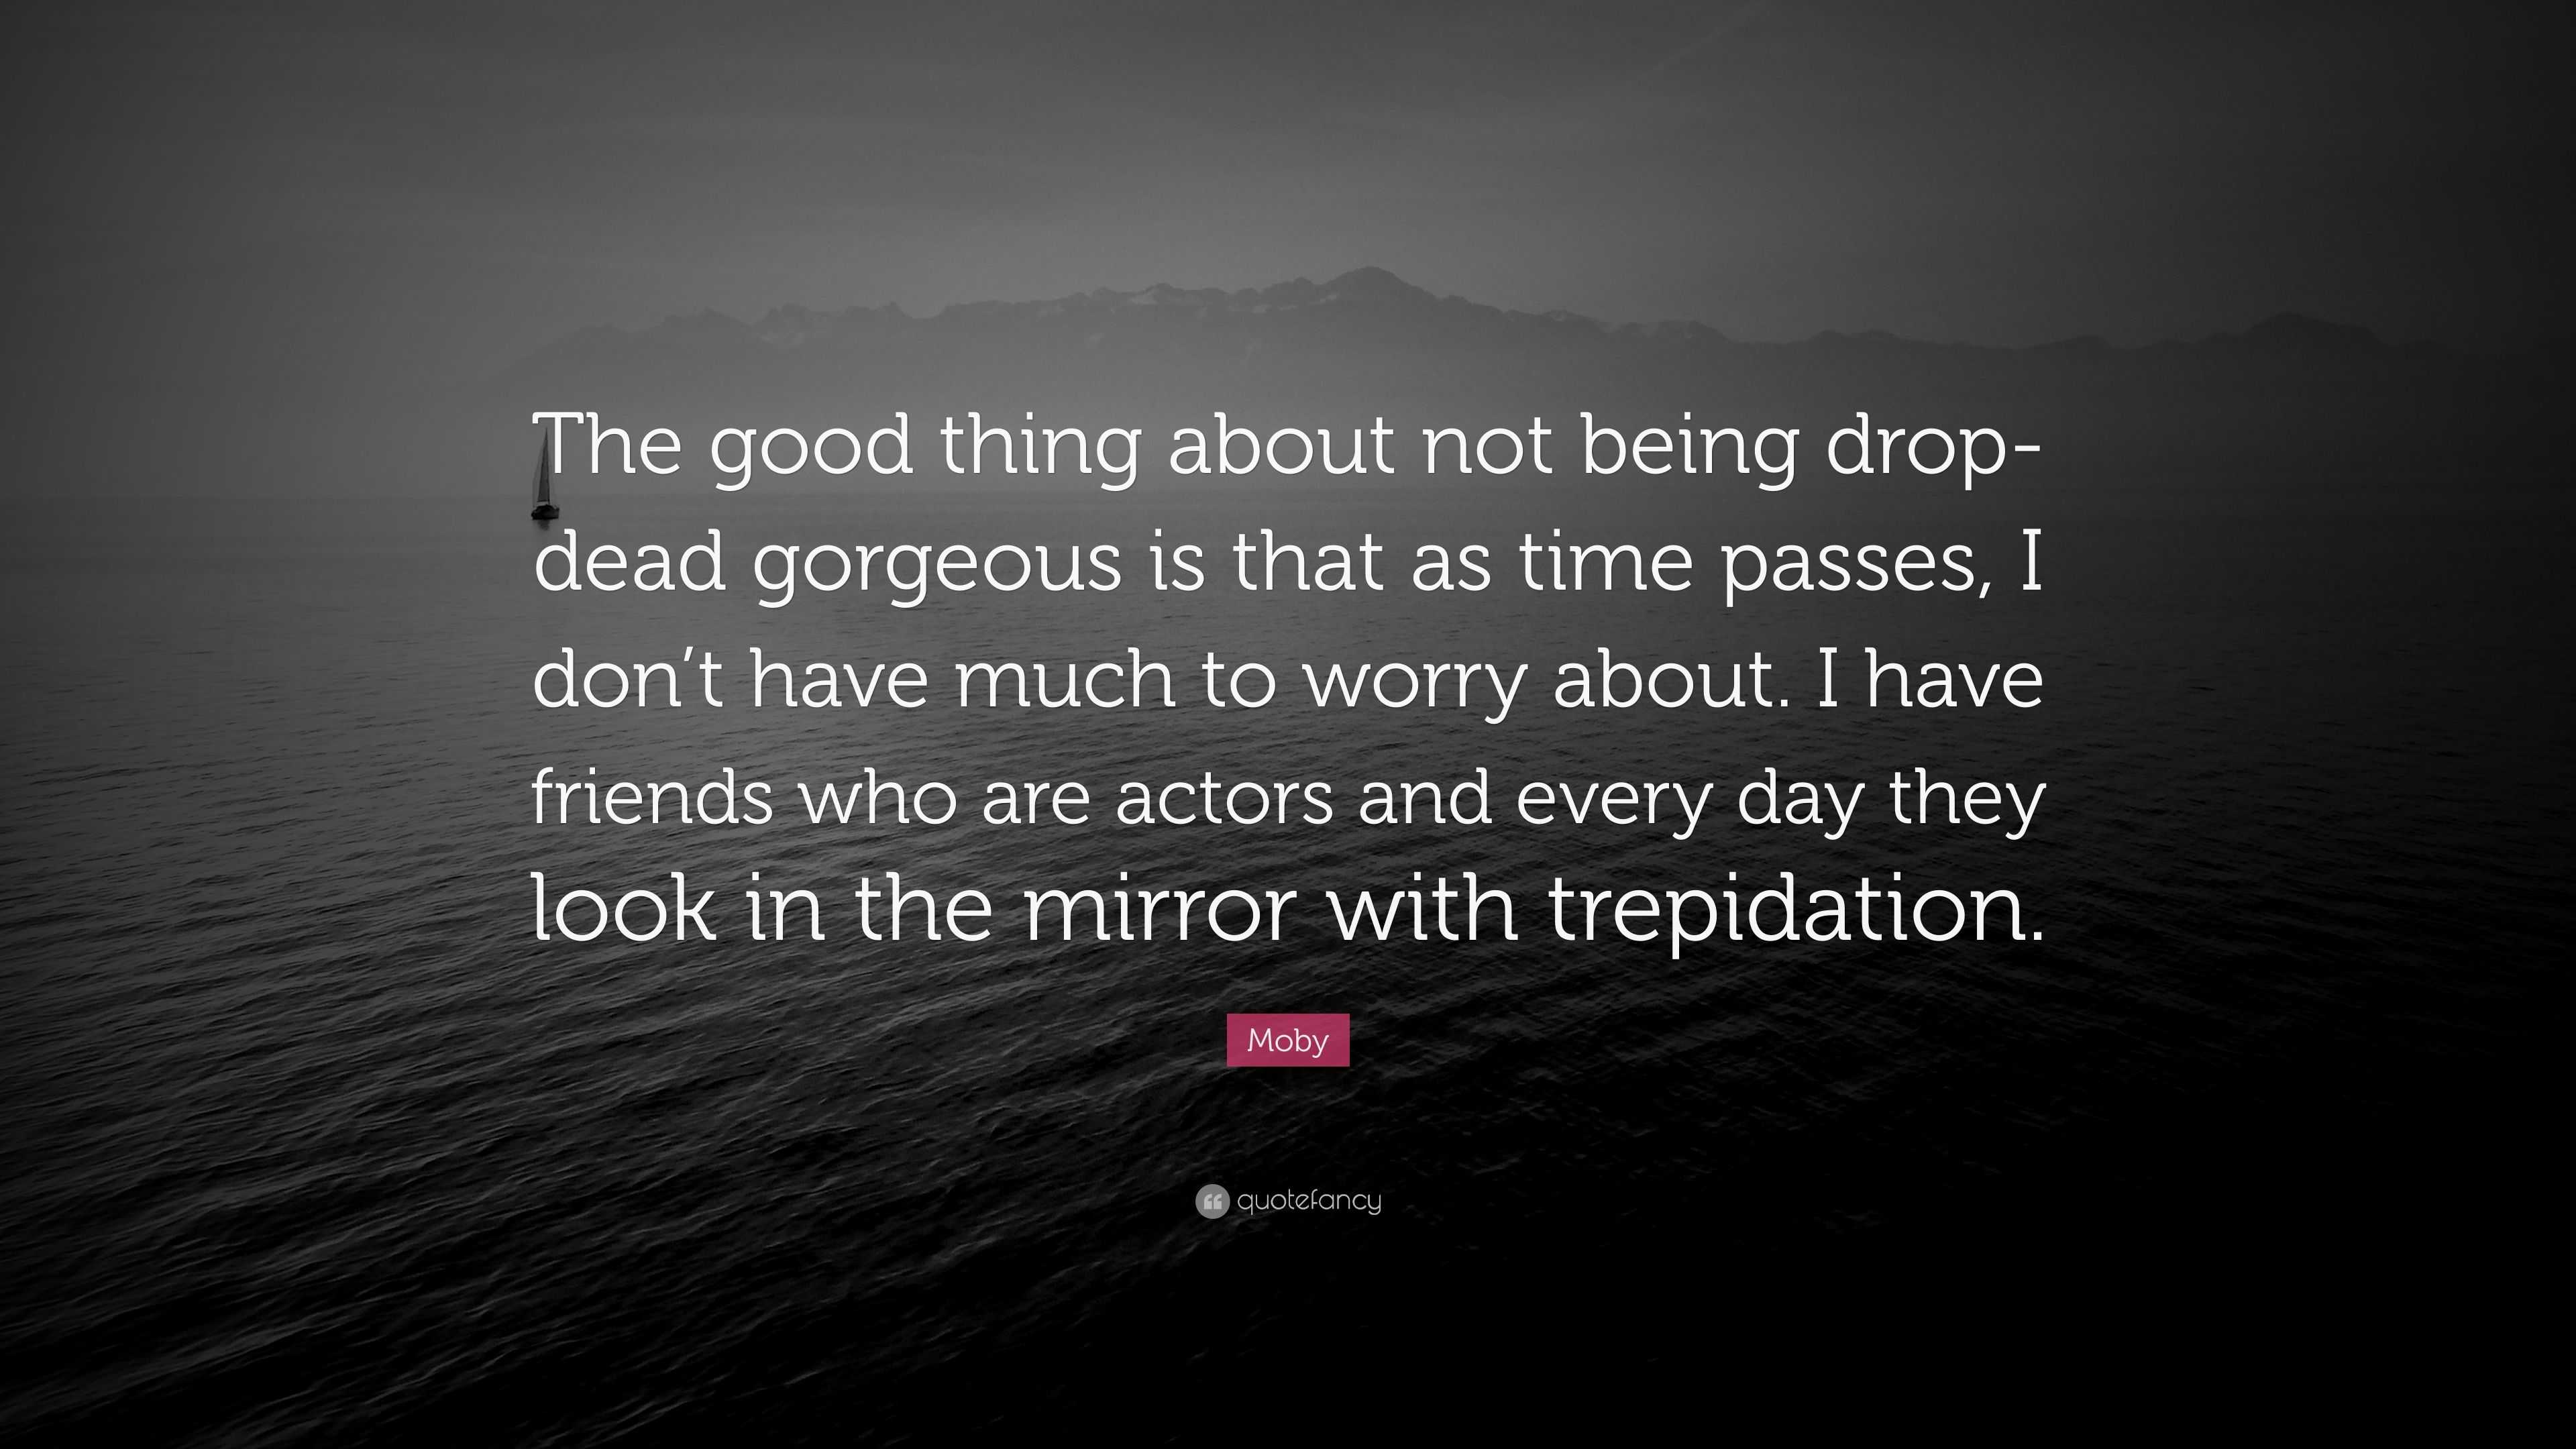 Moby Quote: “The good thing not being drop-dead gorgeous is that time passes, I don't have much to about. I have frien...”